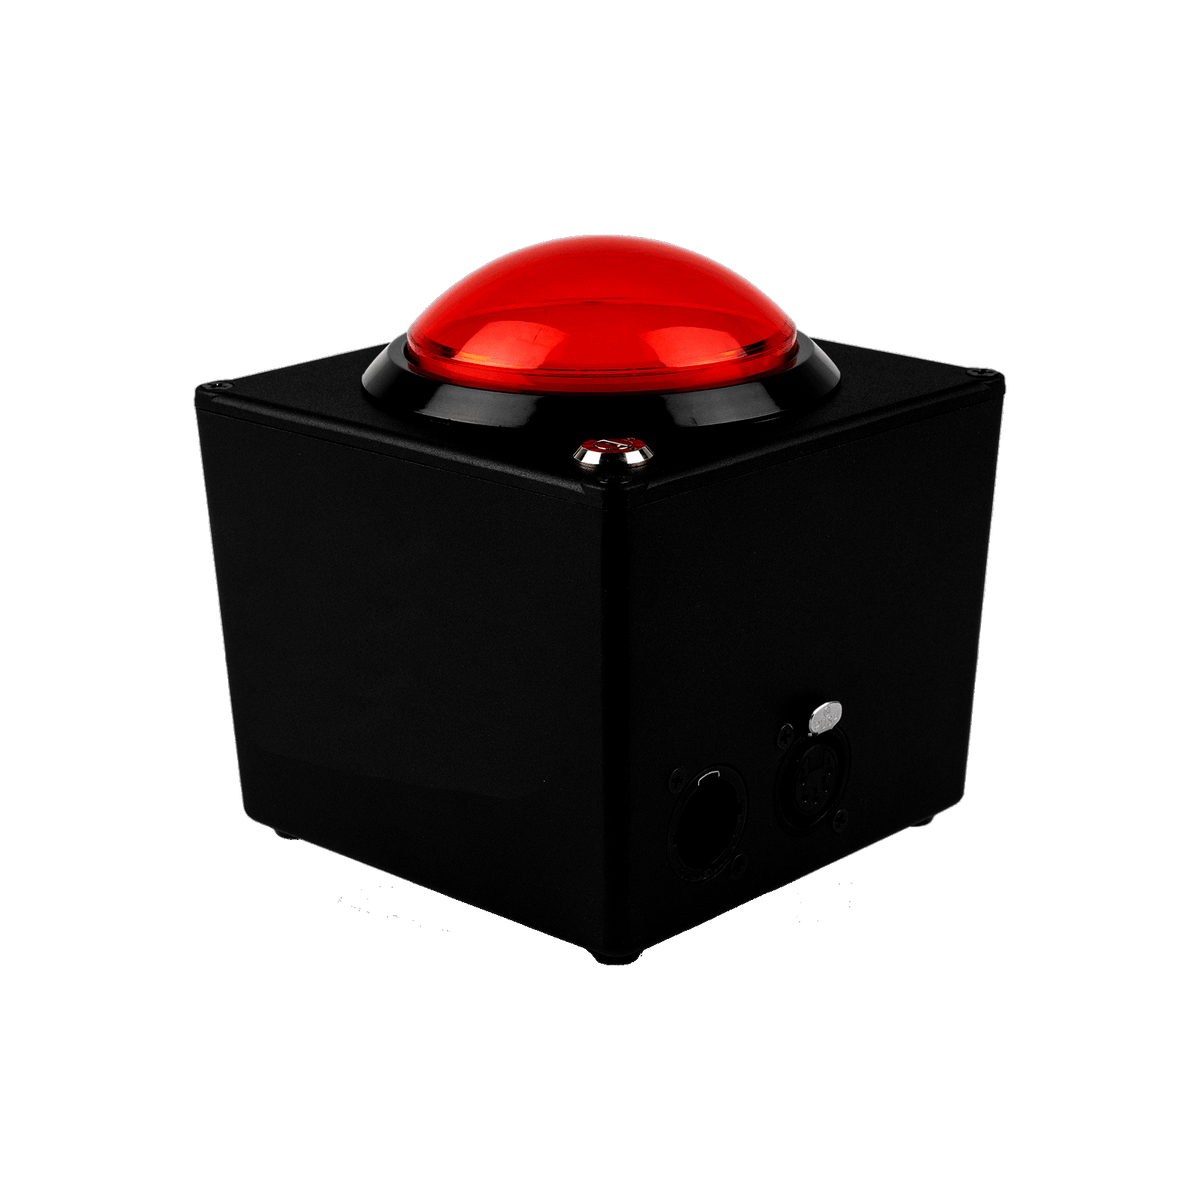 Big Red Button DMX Controller for Special FX